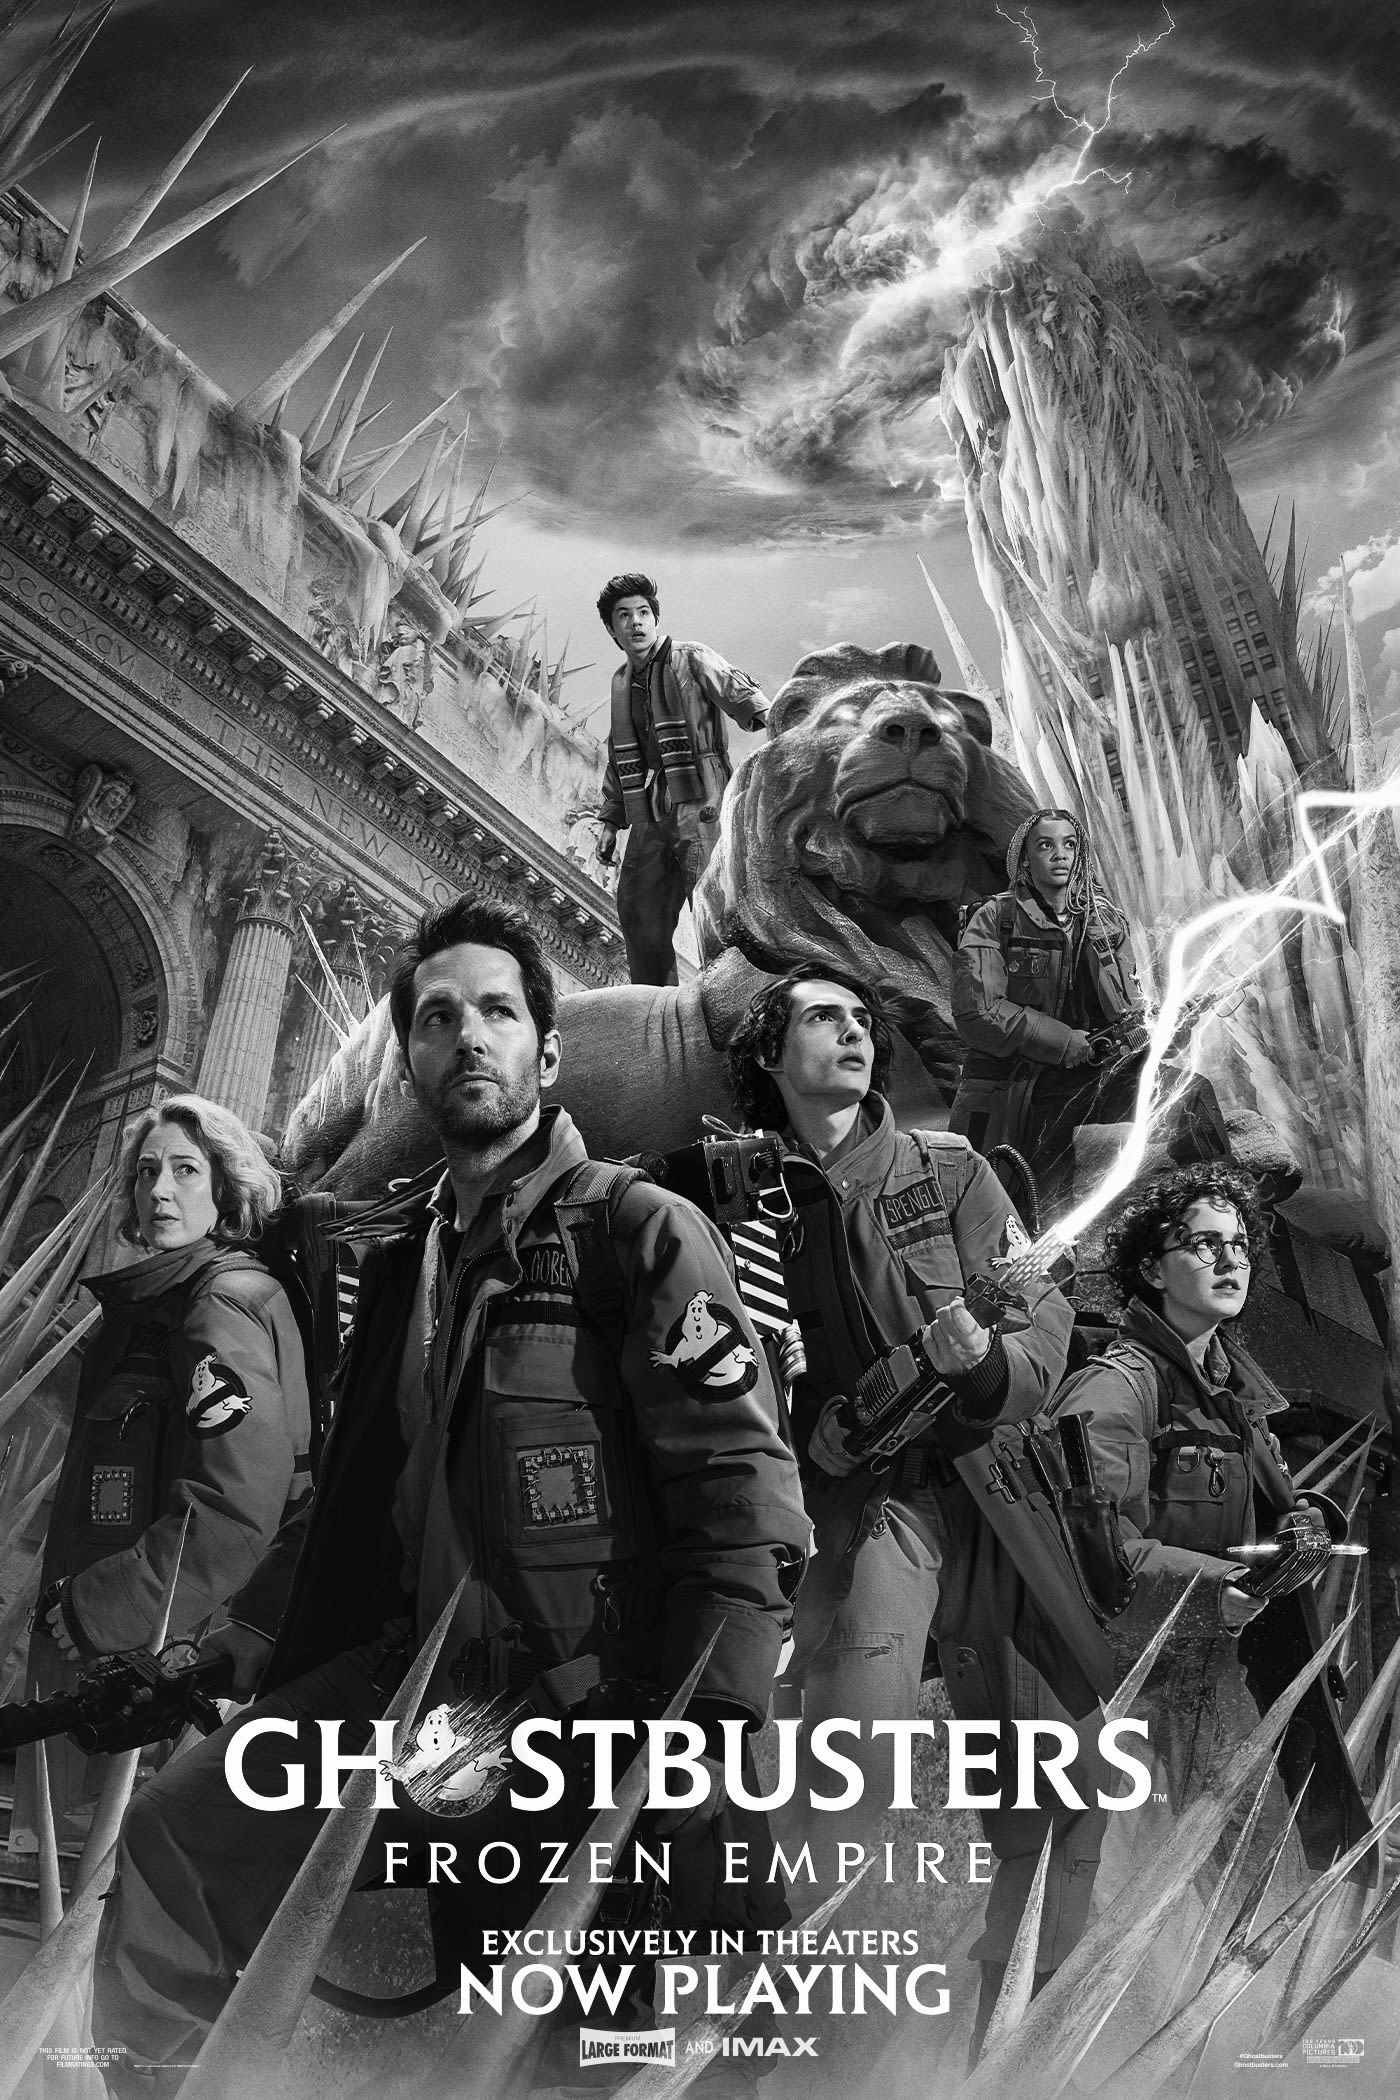 "Ghostbusters: Frozen Empire" Review: A Chilling Sequel That Continues the Legacy - The DePauw